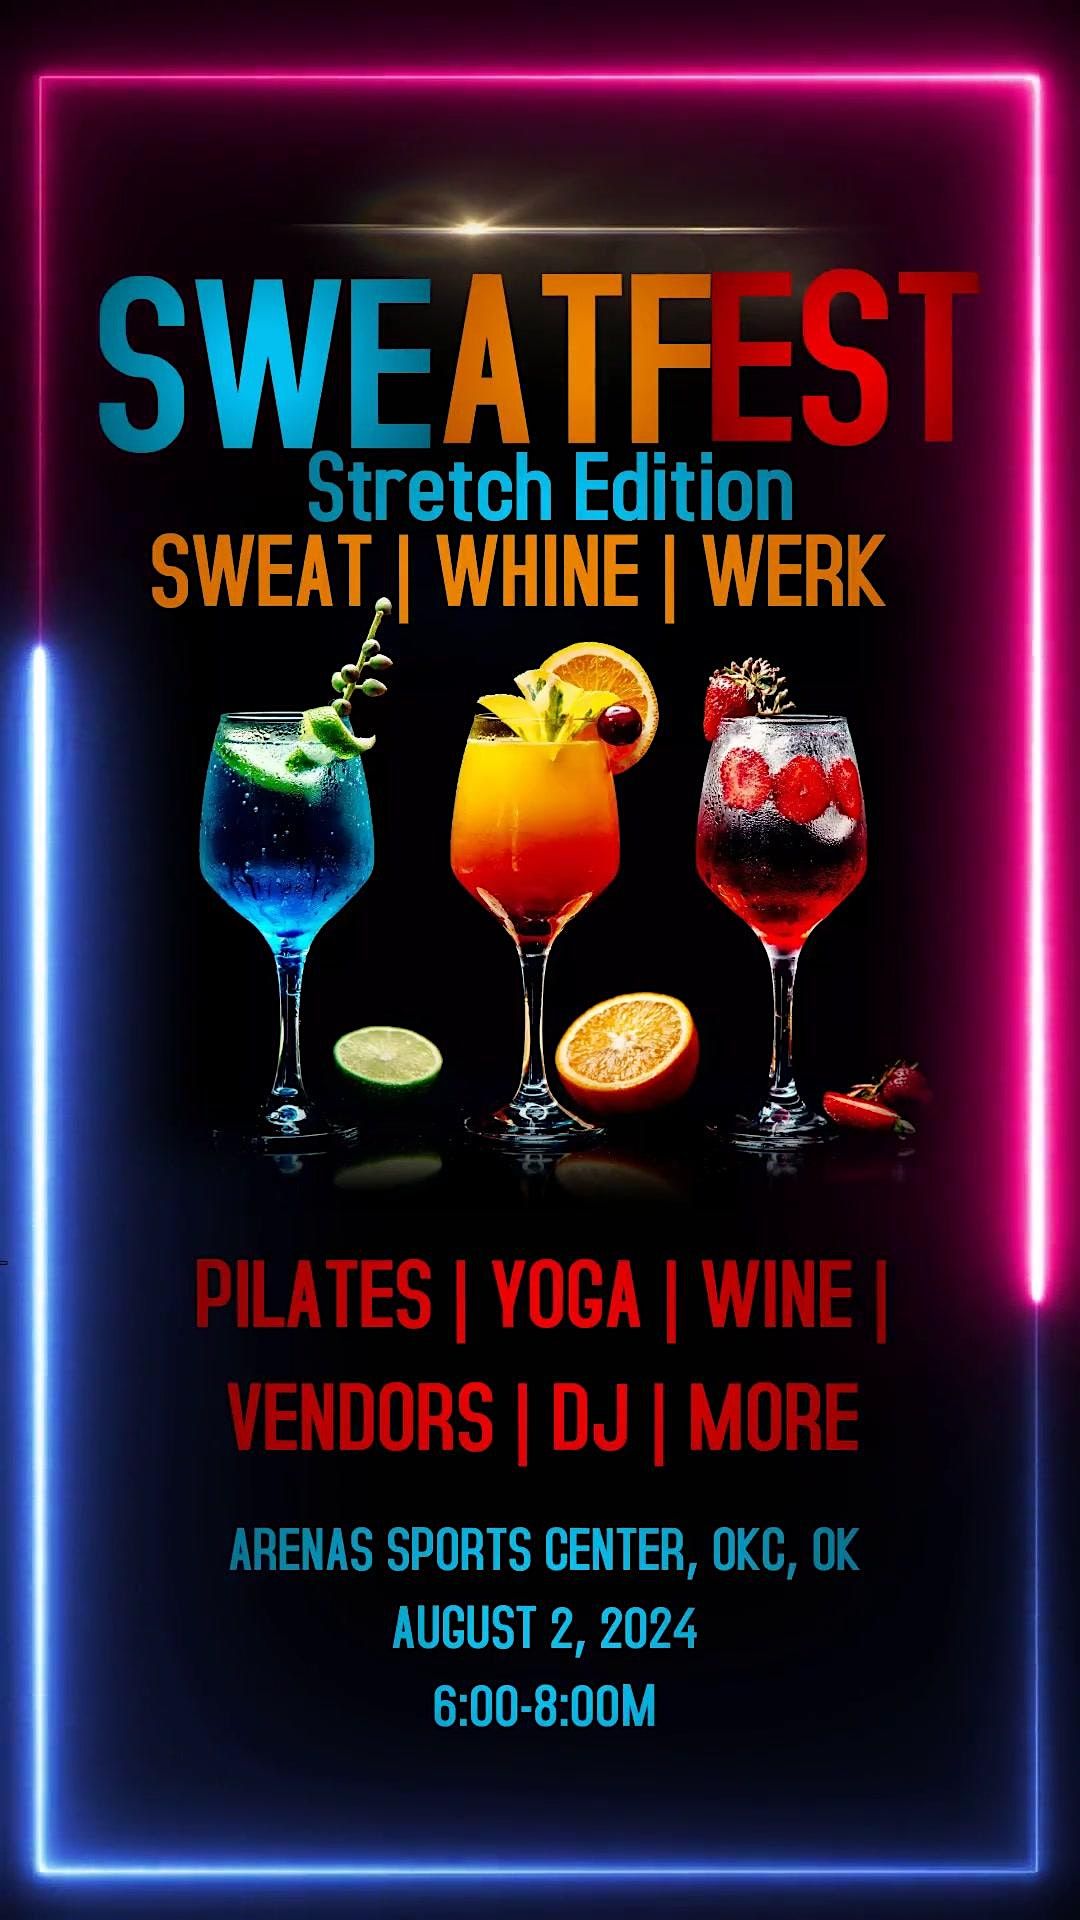 Sweatfest Dance Fitness Series: Stretch and Wine Down Edition